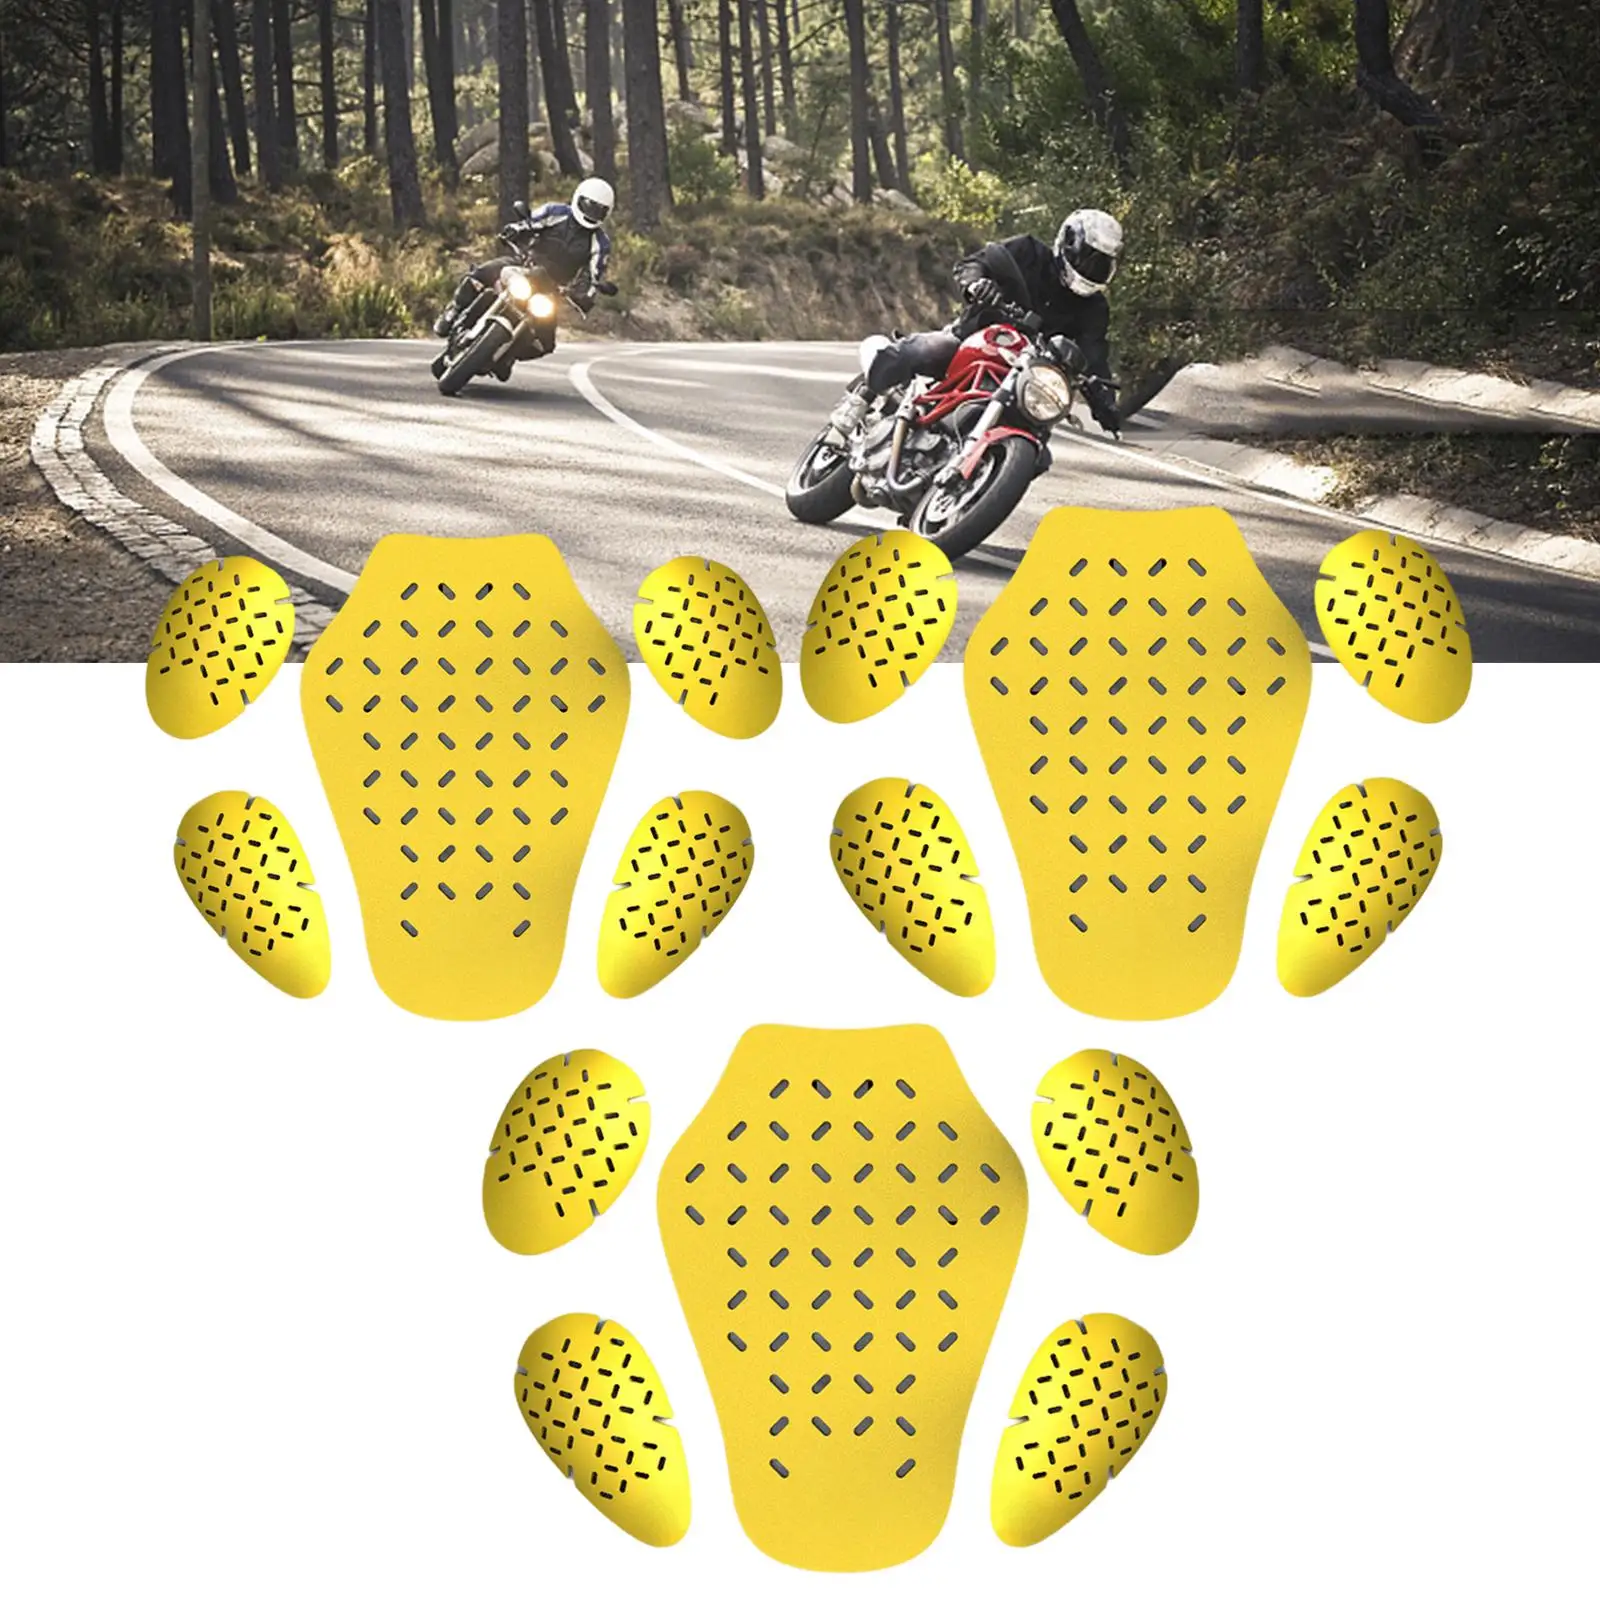 5Pcs Motorbike Insert Armor Pads Armor Protection Pad for Protection